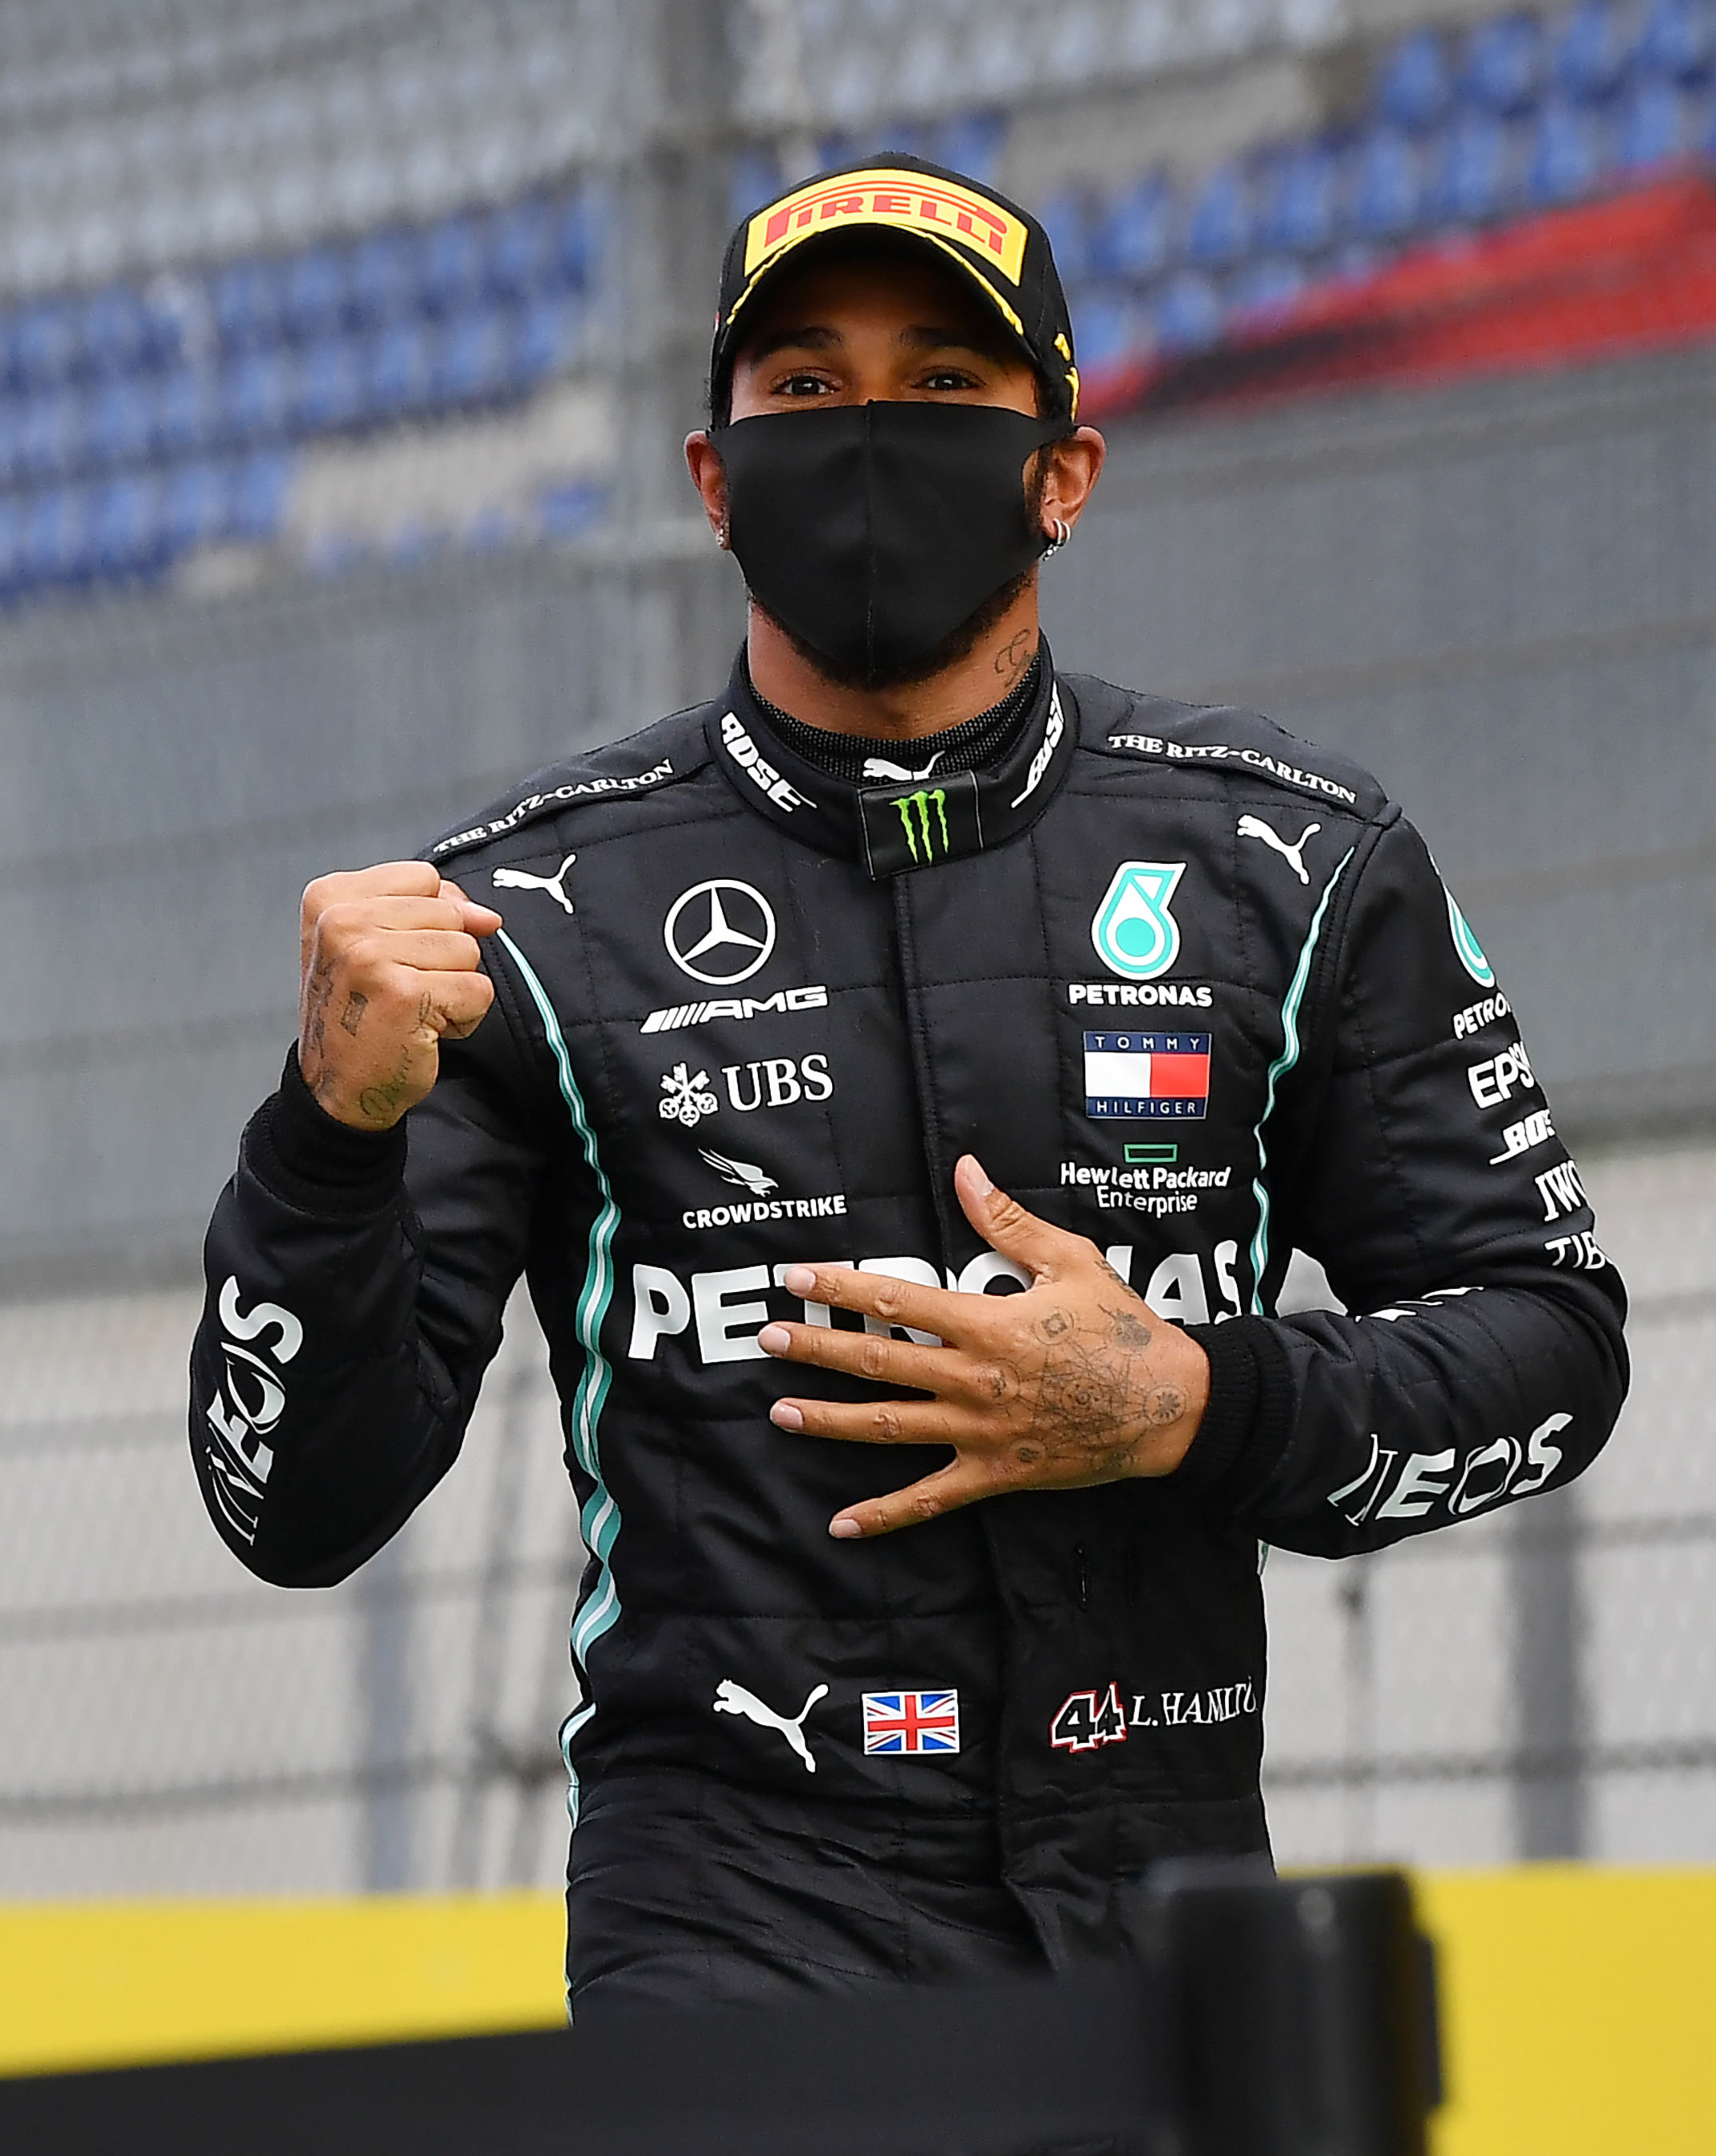 Mercedes' British driver Lewis Hamilton celebrates after the Formula One Styrian Grand Prix race on July 12, 2020 in Spielberg, Austria. (Photo by AFP)